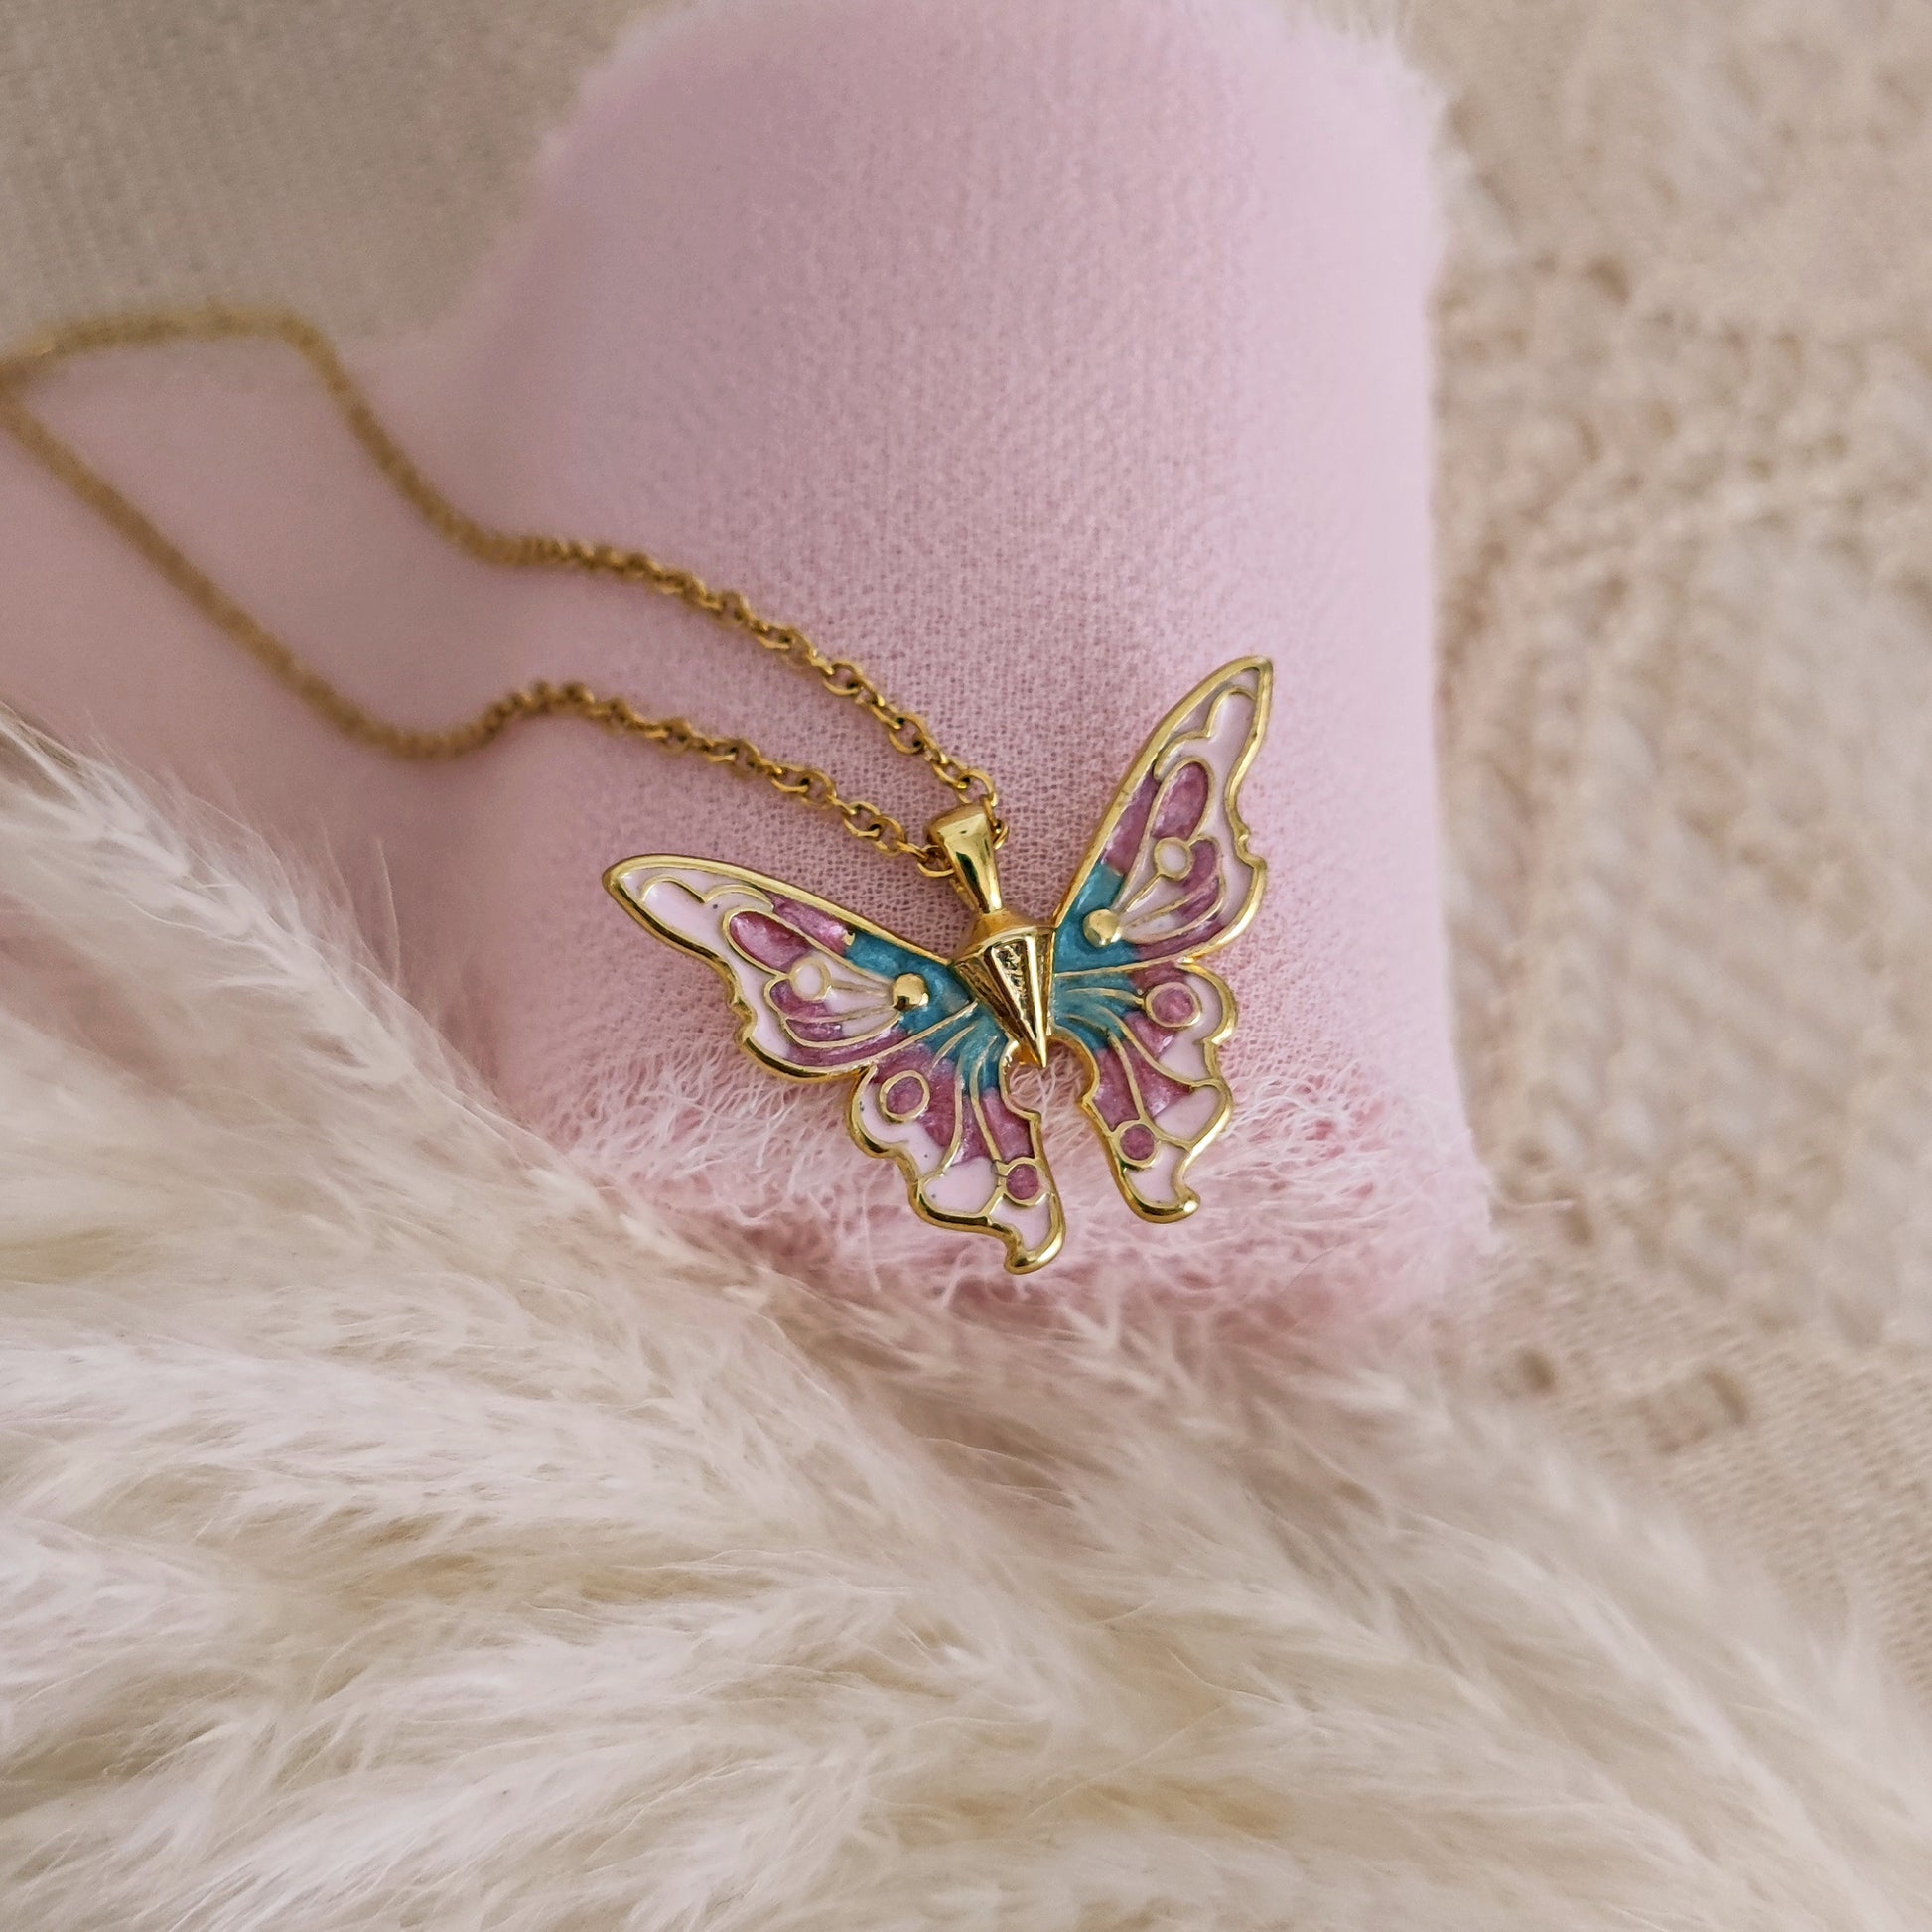 Enamel Choker Chains Necklaces, Barbie Butterfly Necklace